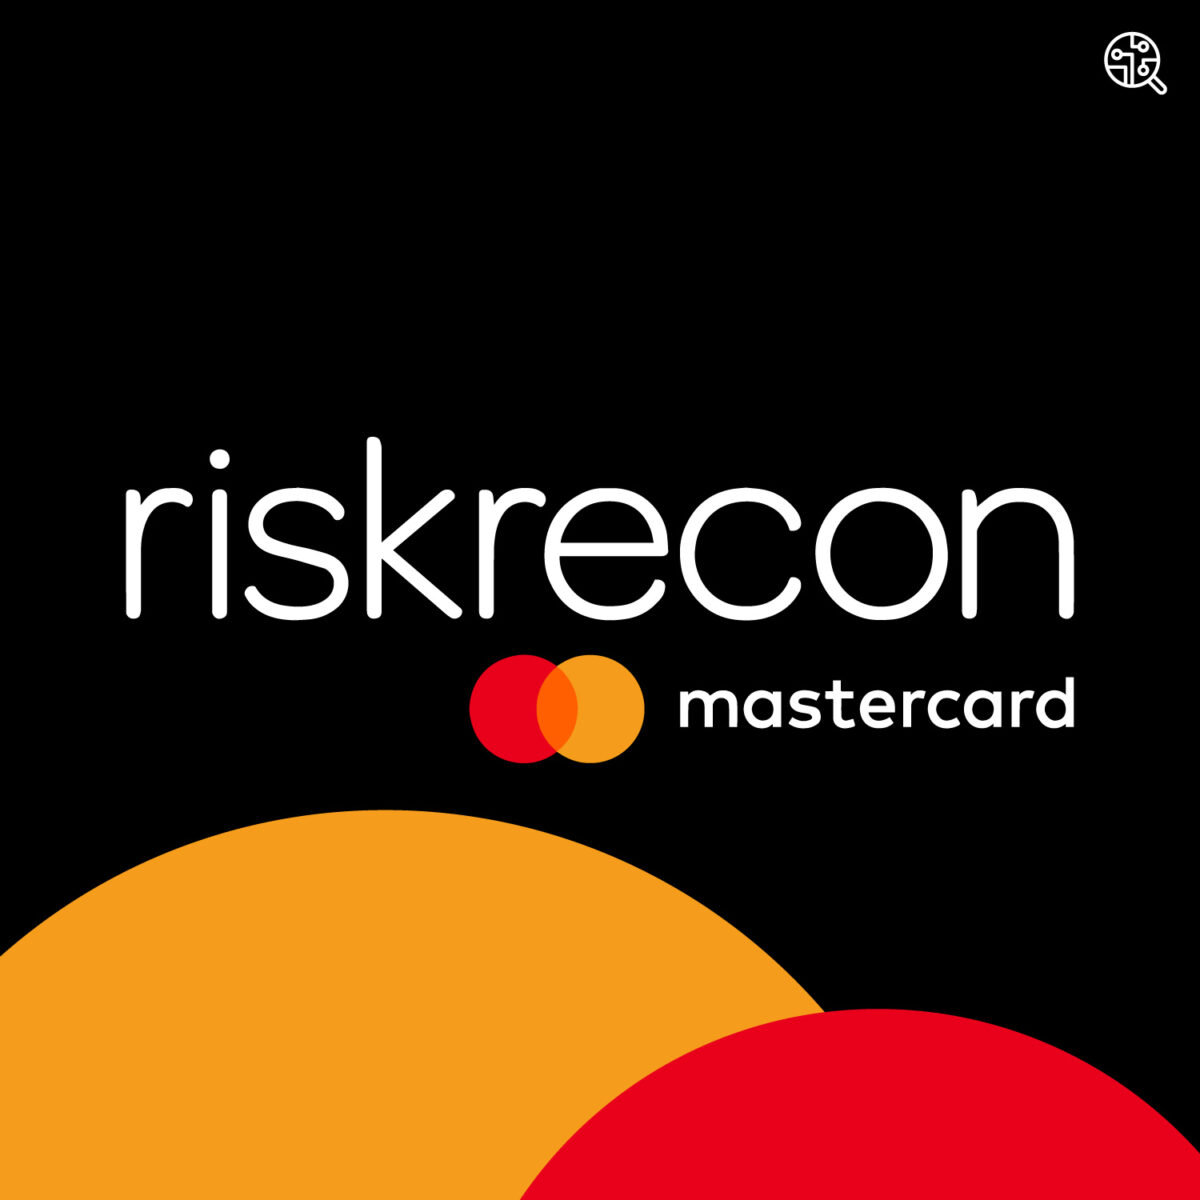 News thumbnail of the RiskRecon logo, with RiskRecon branding